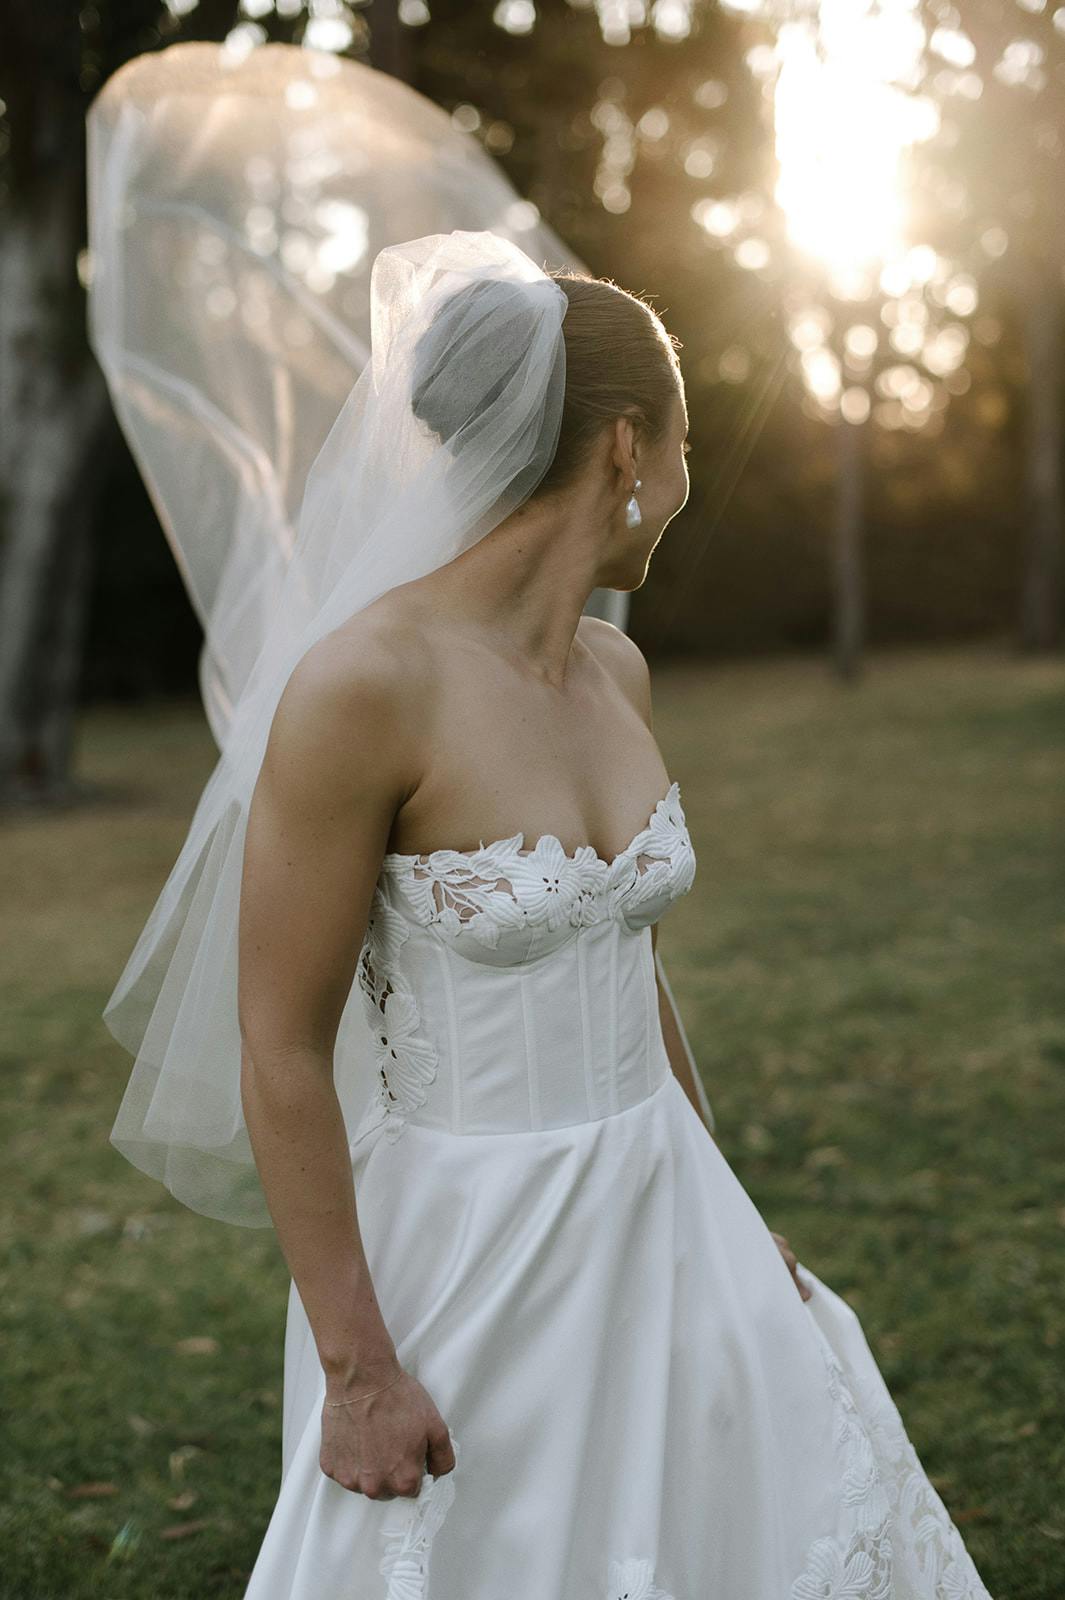 A bride in a strapless white wedding dress and long veil stands outdoors, looking to her left. The sunlight filters through the trees in the background, casting a soft glow. She is holding the skirt of her dress, and the scene is serene and picturesque.